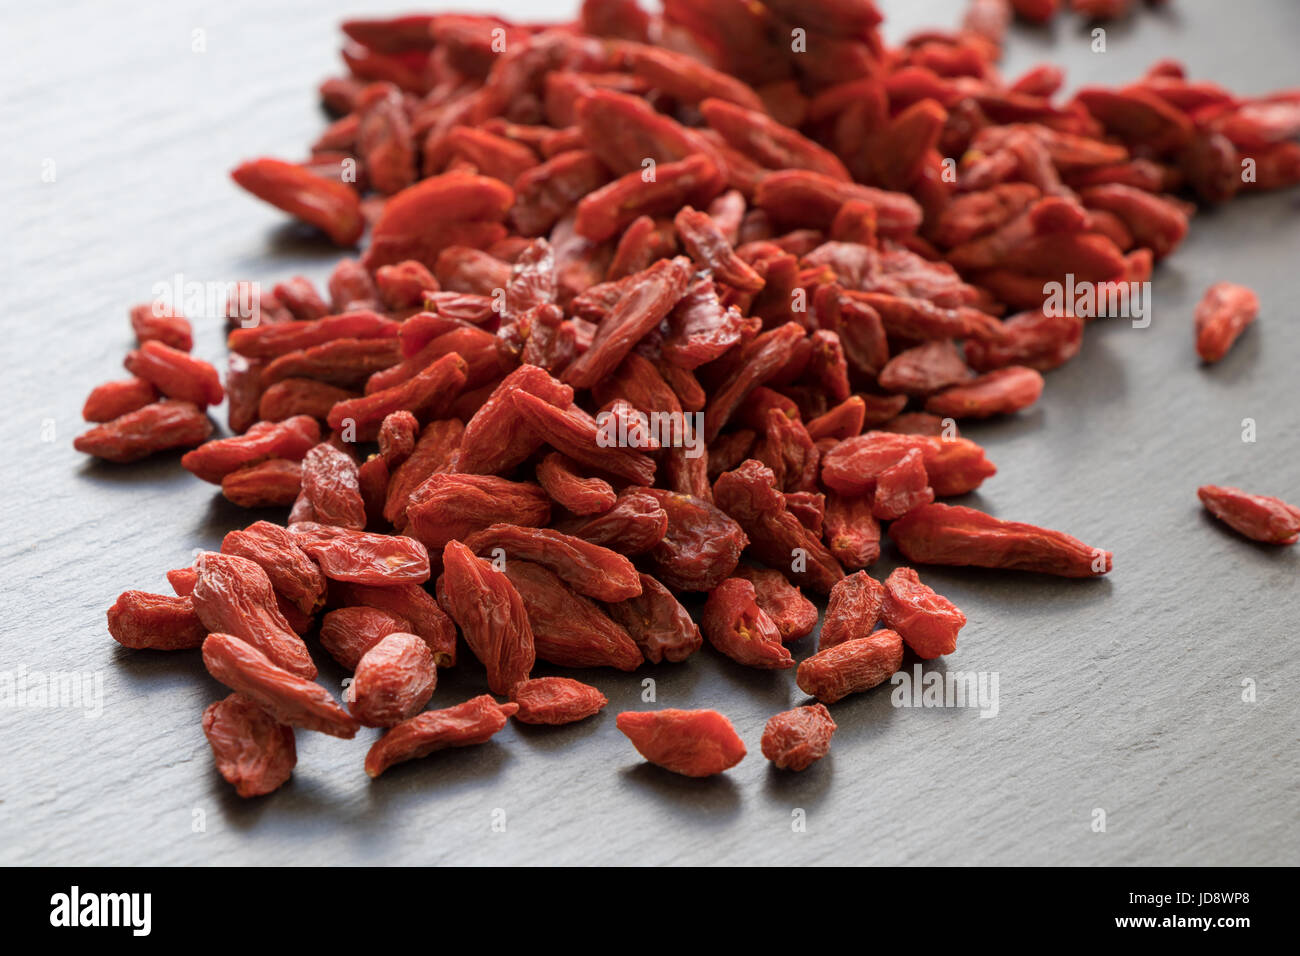 A pile of dried goji berries on a stone background. Stock Photo